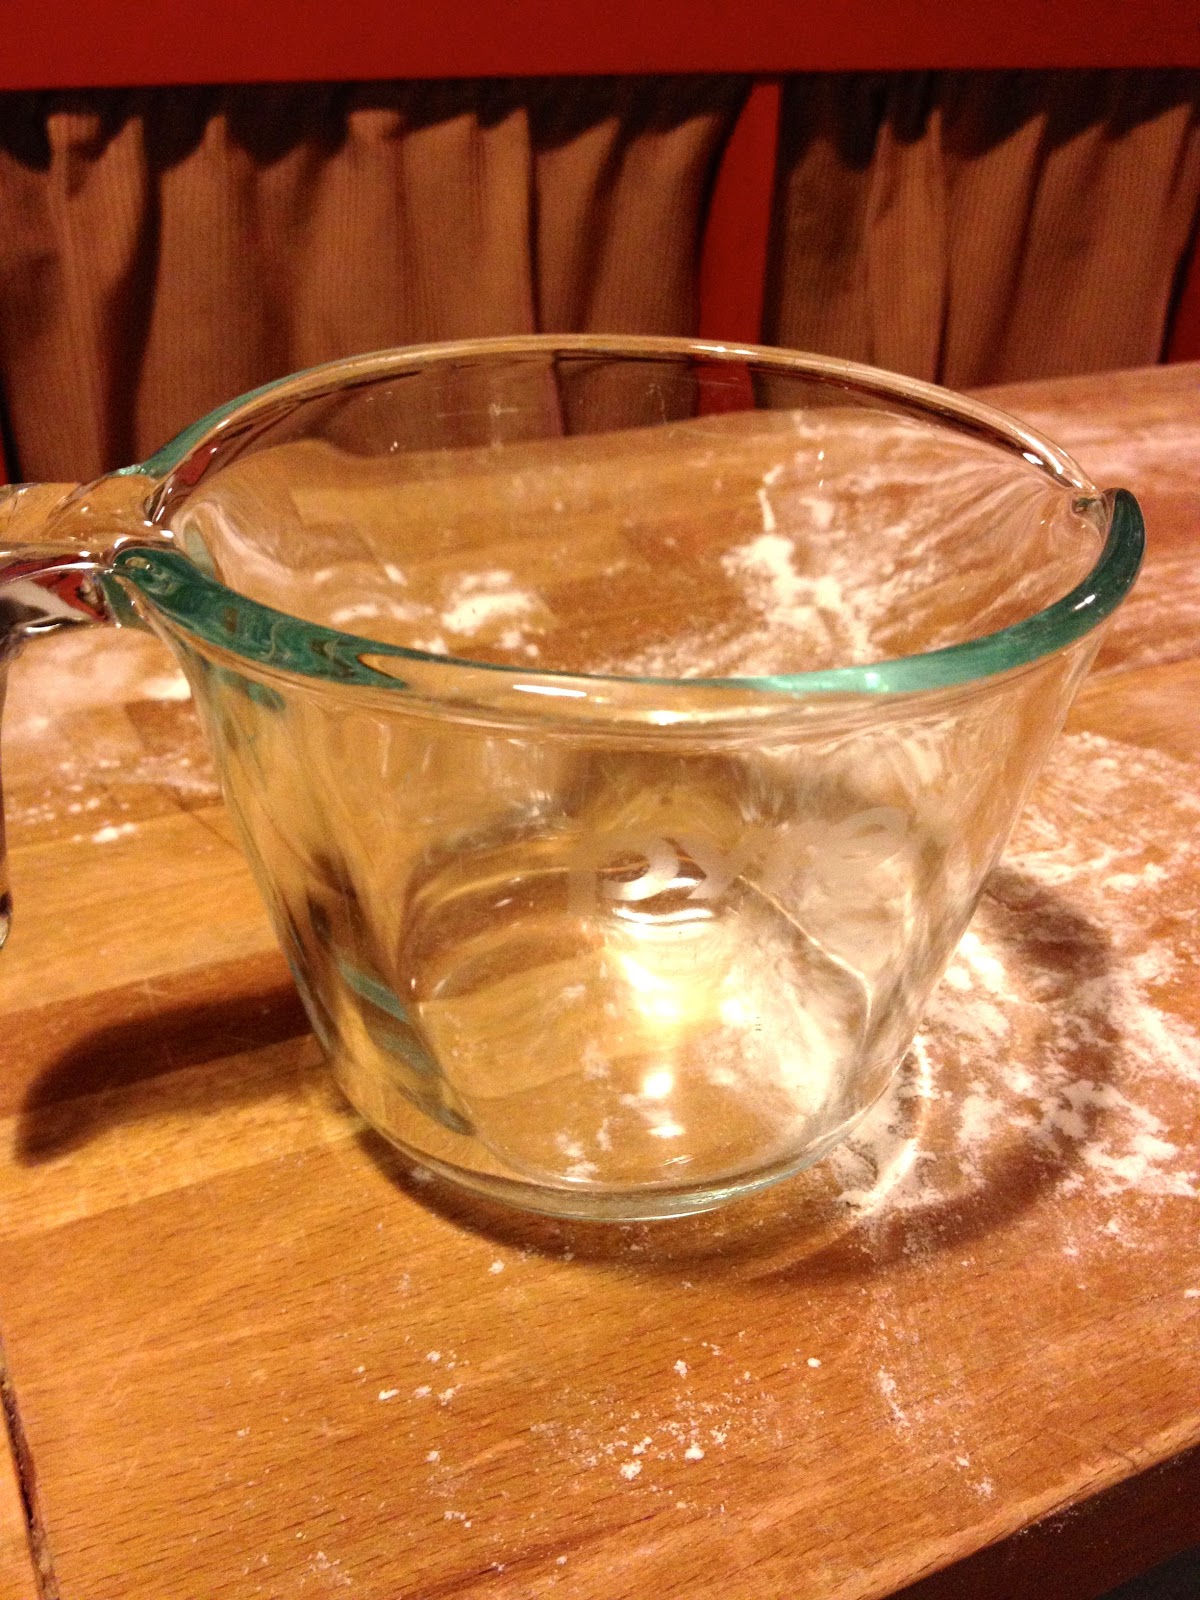 I've Been Using My Favorite Pyrex Measuring Cup for a Decade and I